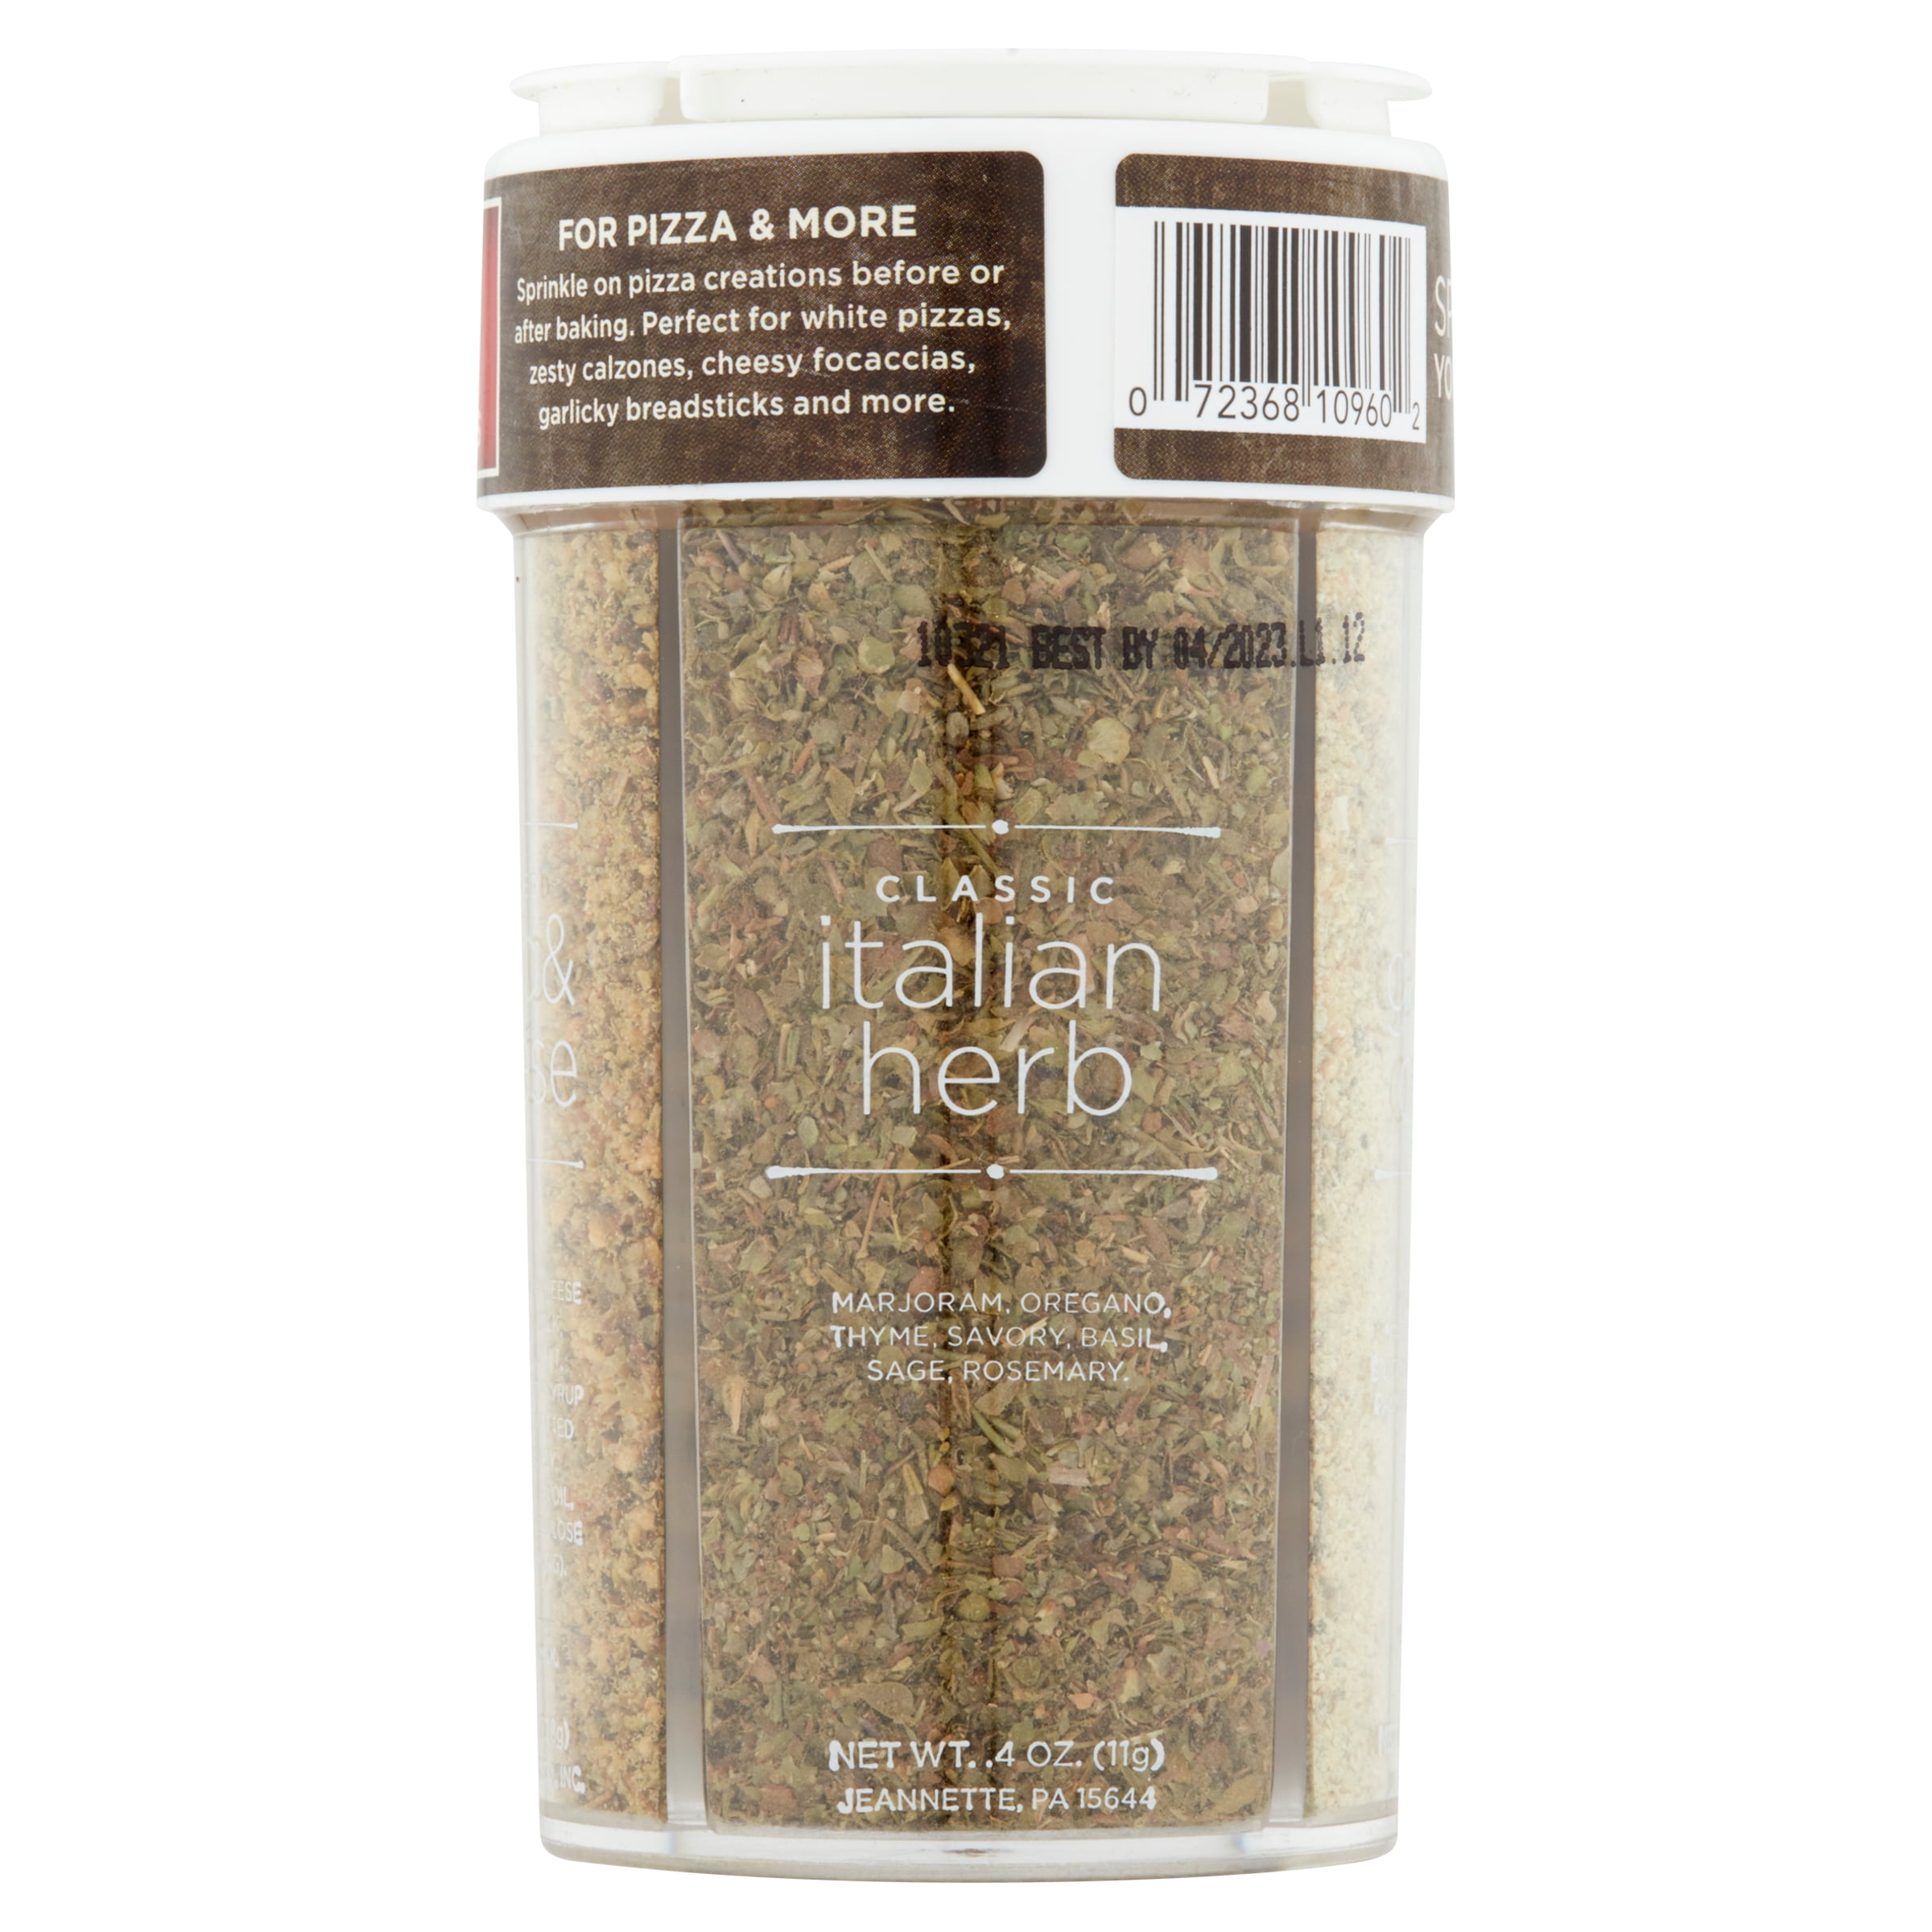 Pizza Pie Shaker Seasoning, Hand-blended Herb Mix, no salt, chives